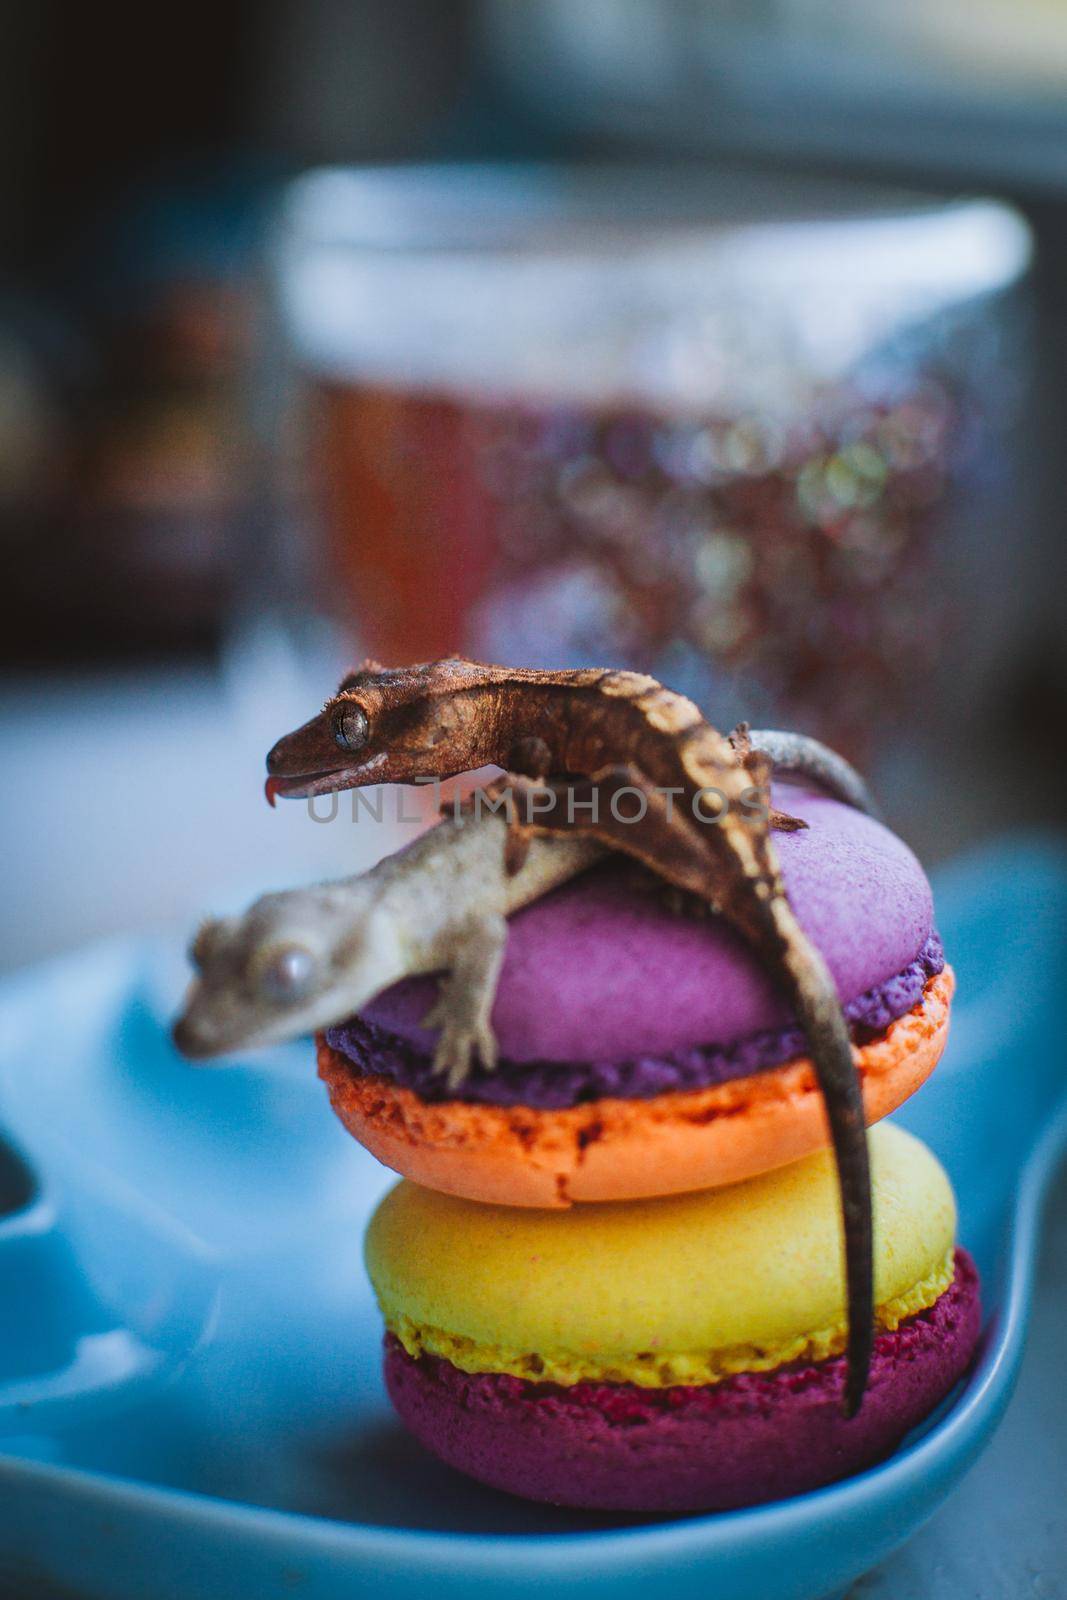 New Caledonian crested gecko on macaroon desserts by RosaJay